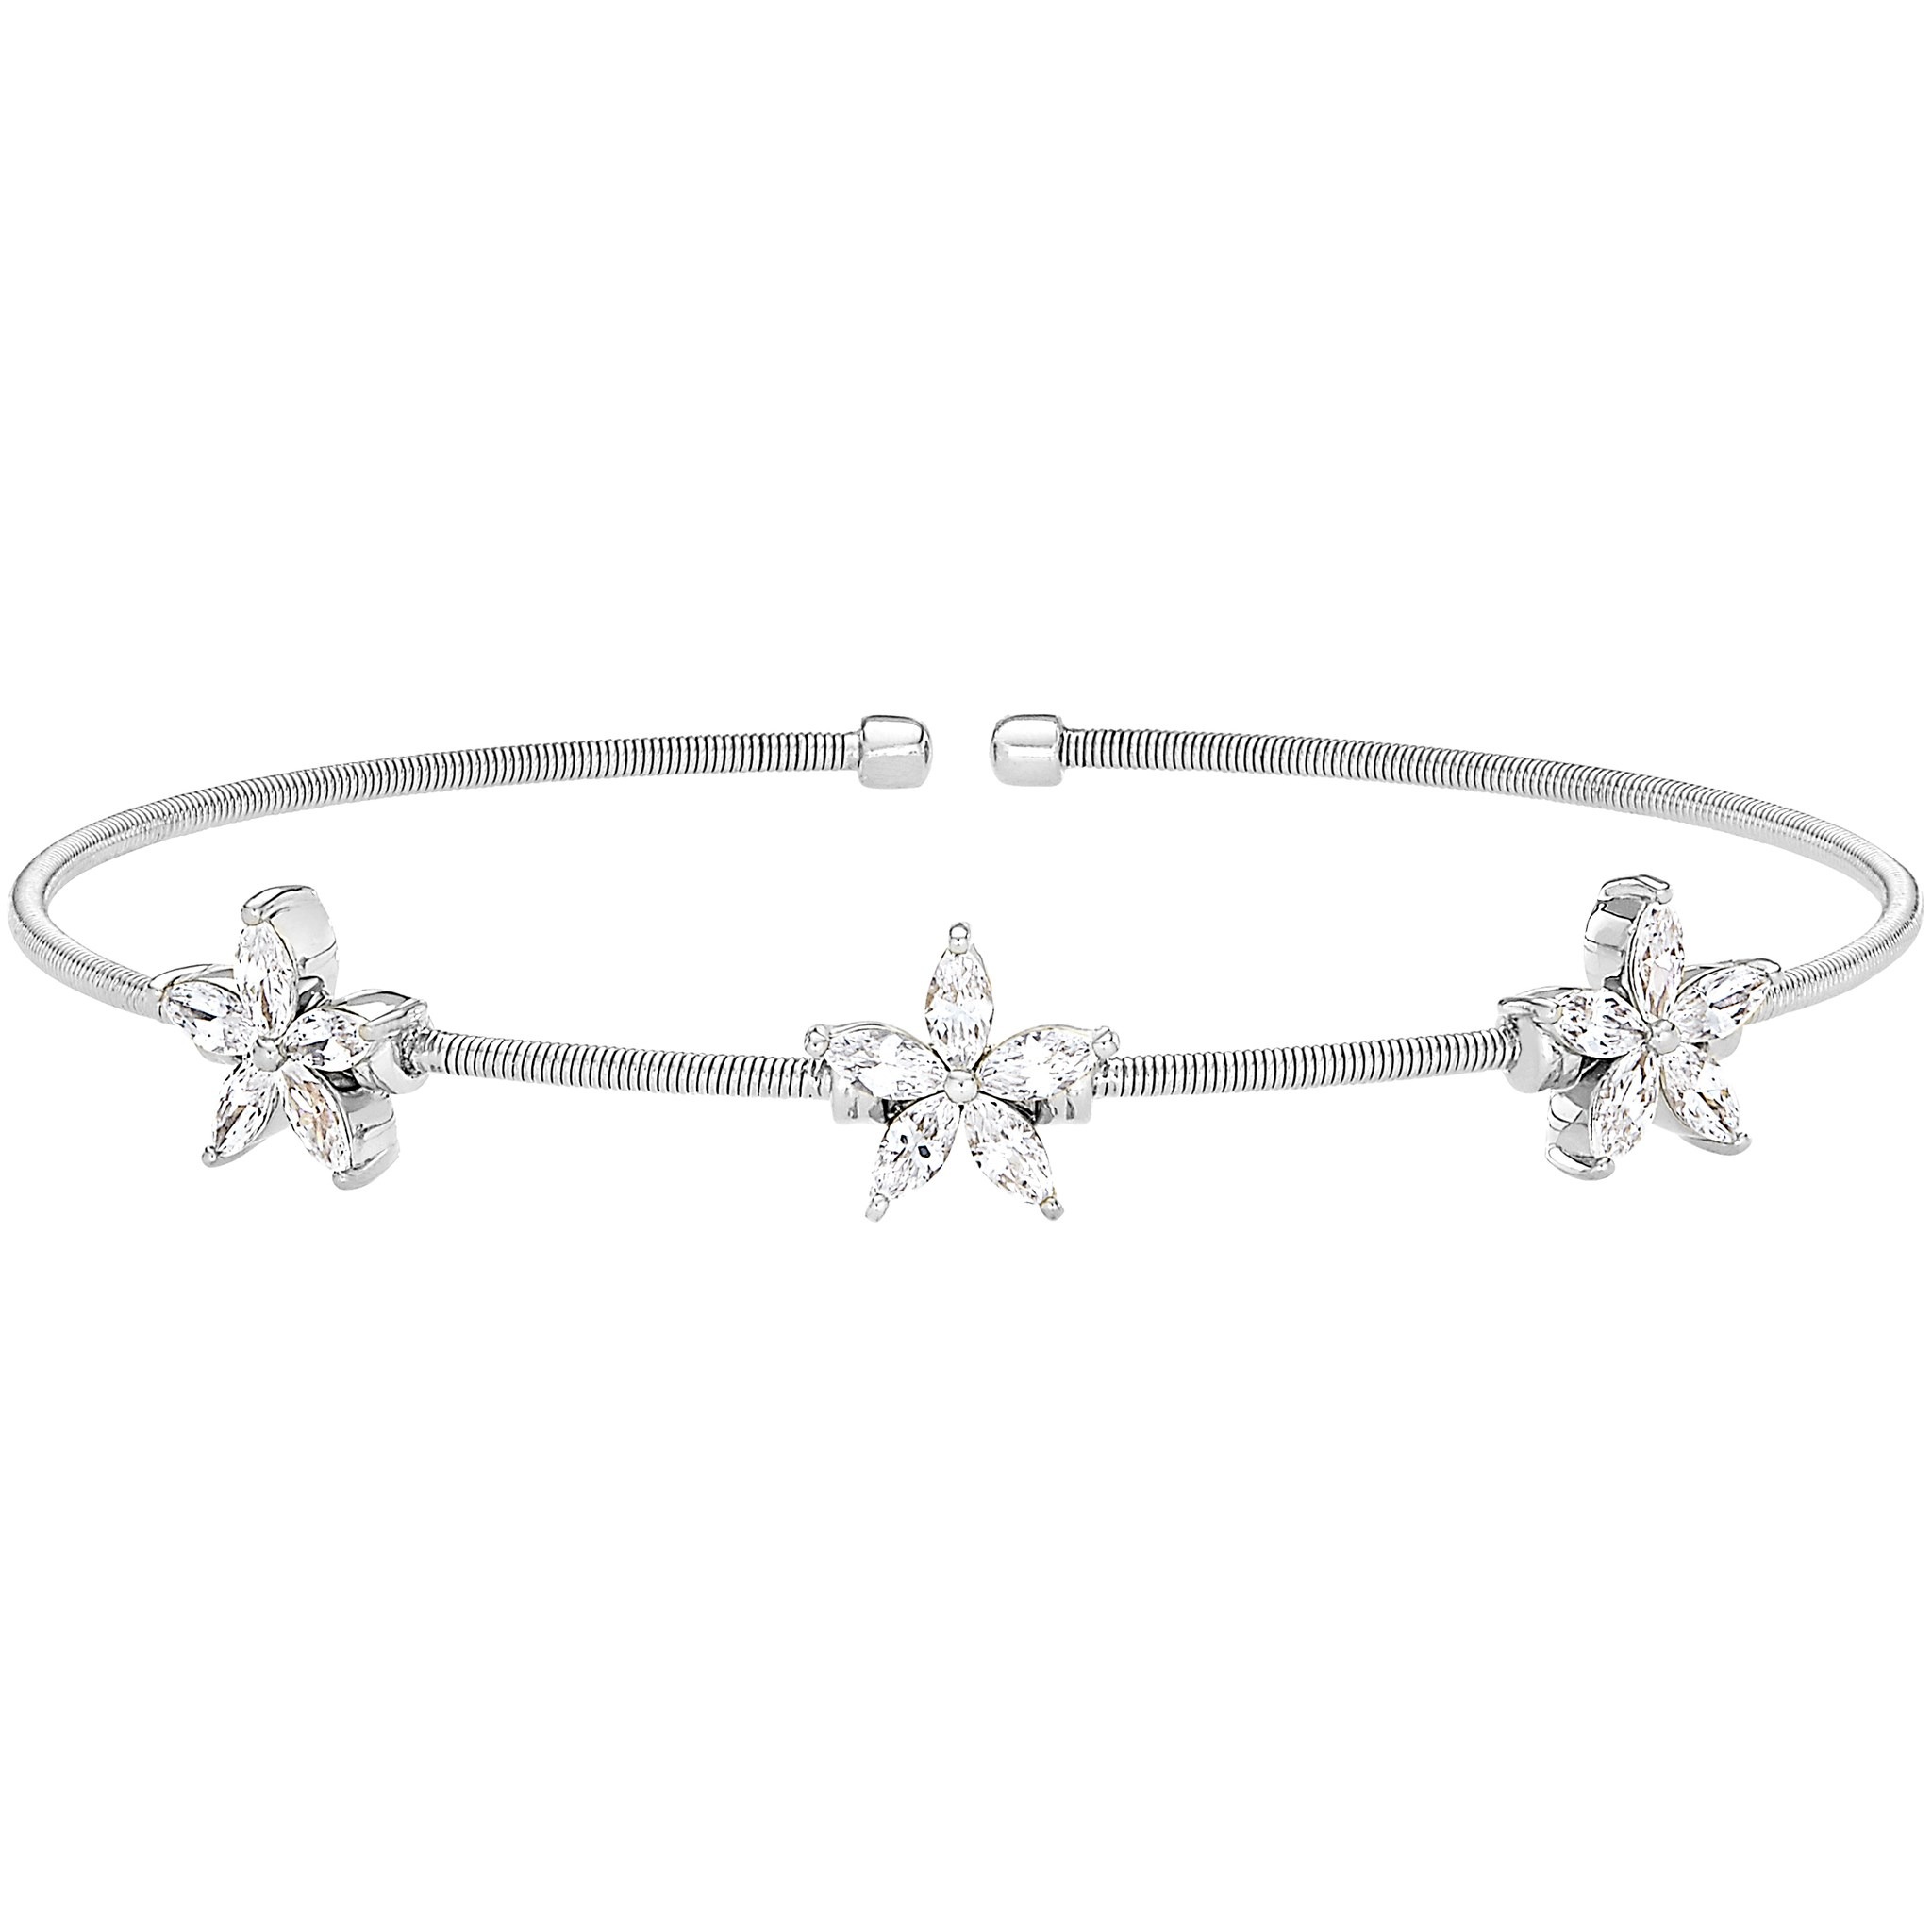 Rhodium Finish Sterling Silver Cable Cuff Bracelet with Simulated Diamond Flowers